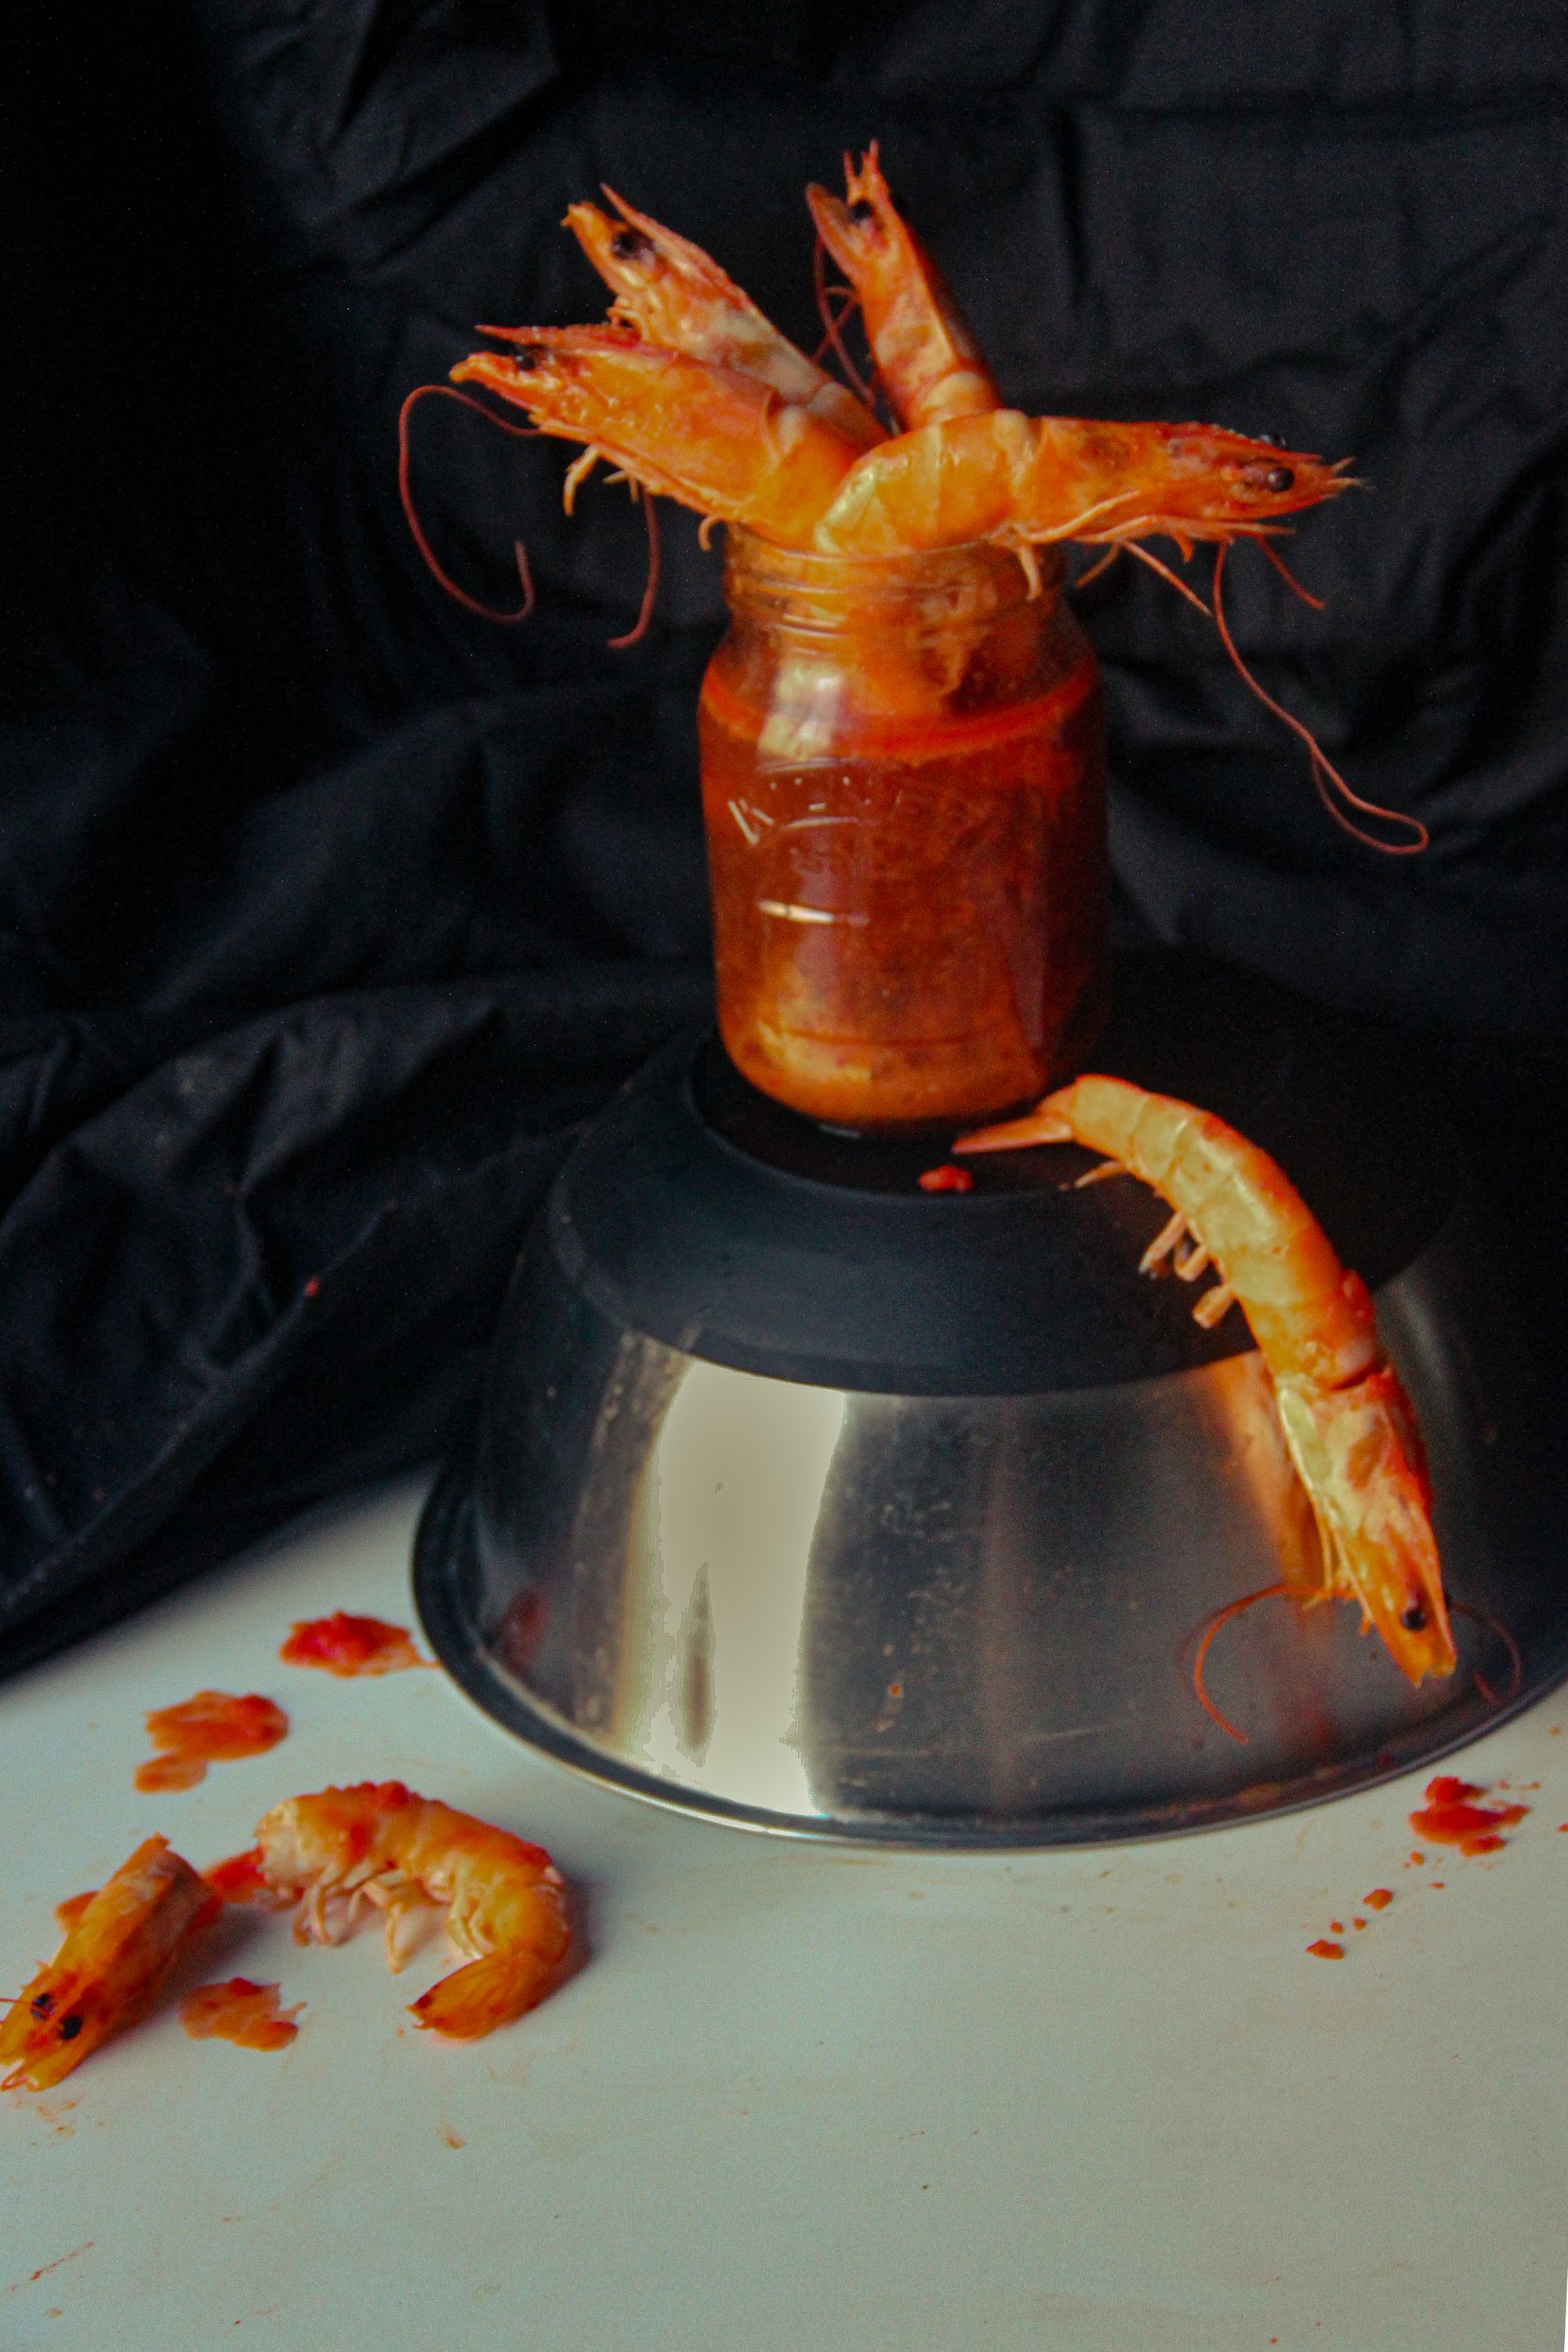 Surrealism and food photoshoot with shrimp Inspired by Salvador Dali